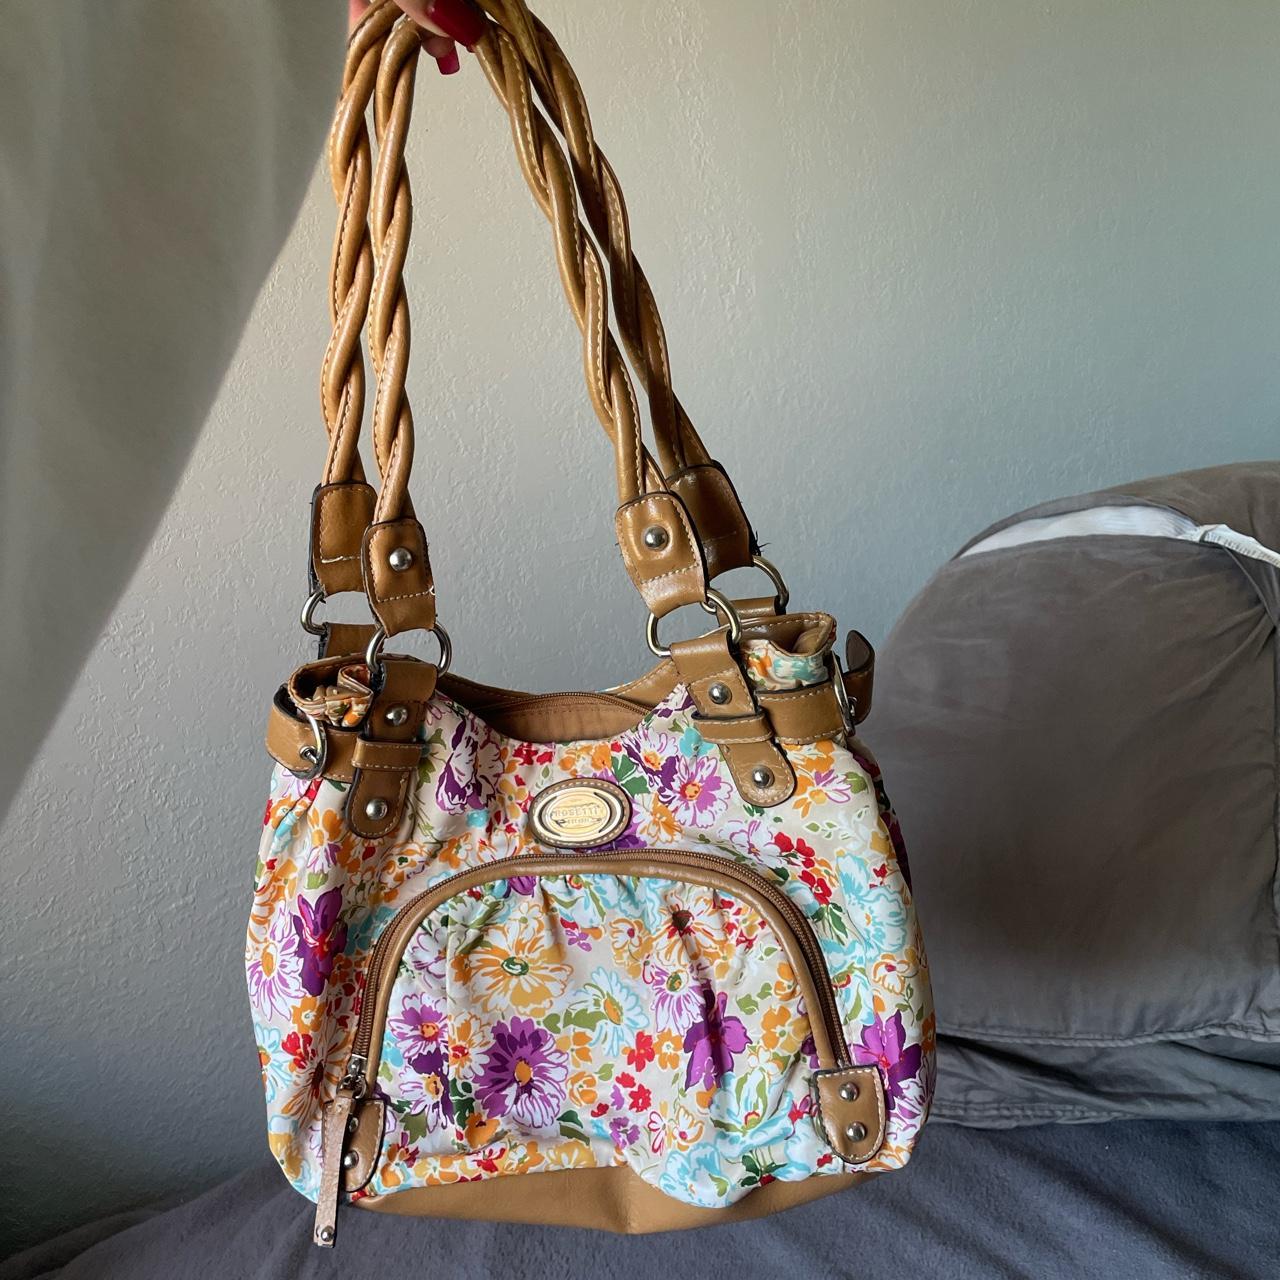 Stylish Floral Tote Bag - Spacious and Chic